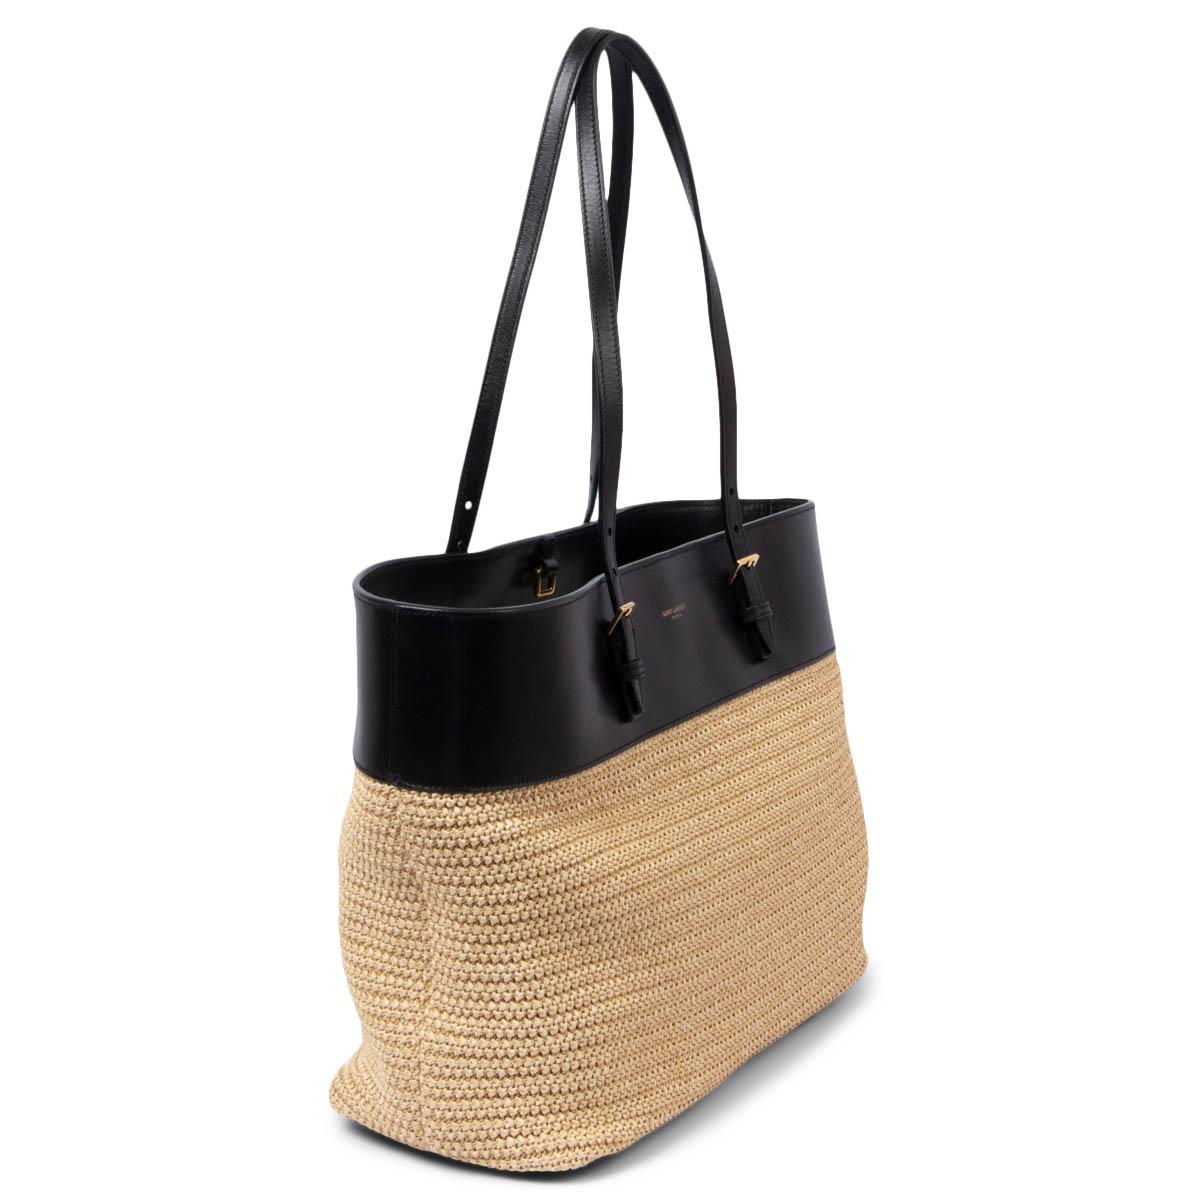 100% authentic Saint Laurent Medium Shopping tote bag in natural raffia with black smooth leather trim. Opens with a leather strap on top and is lined in black grosgrain with one flat pocket against the back. Has been carried once and is in